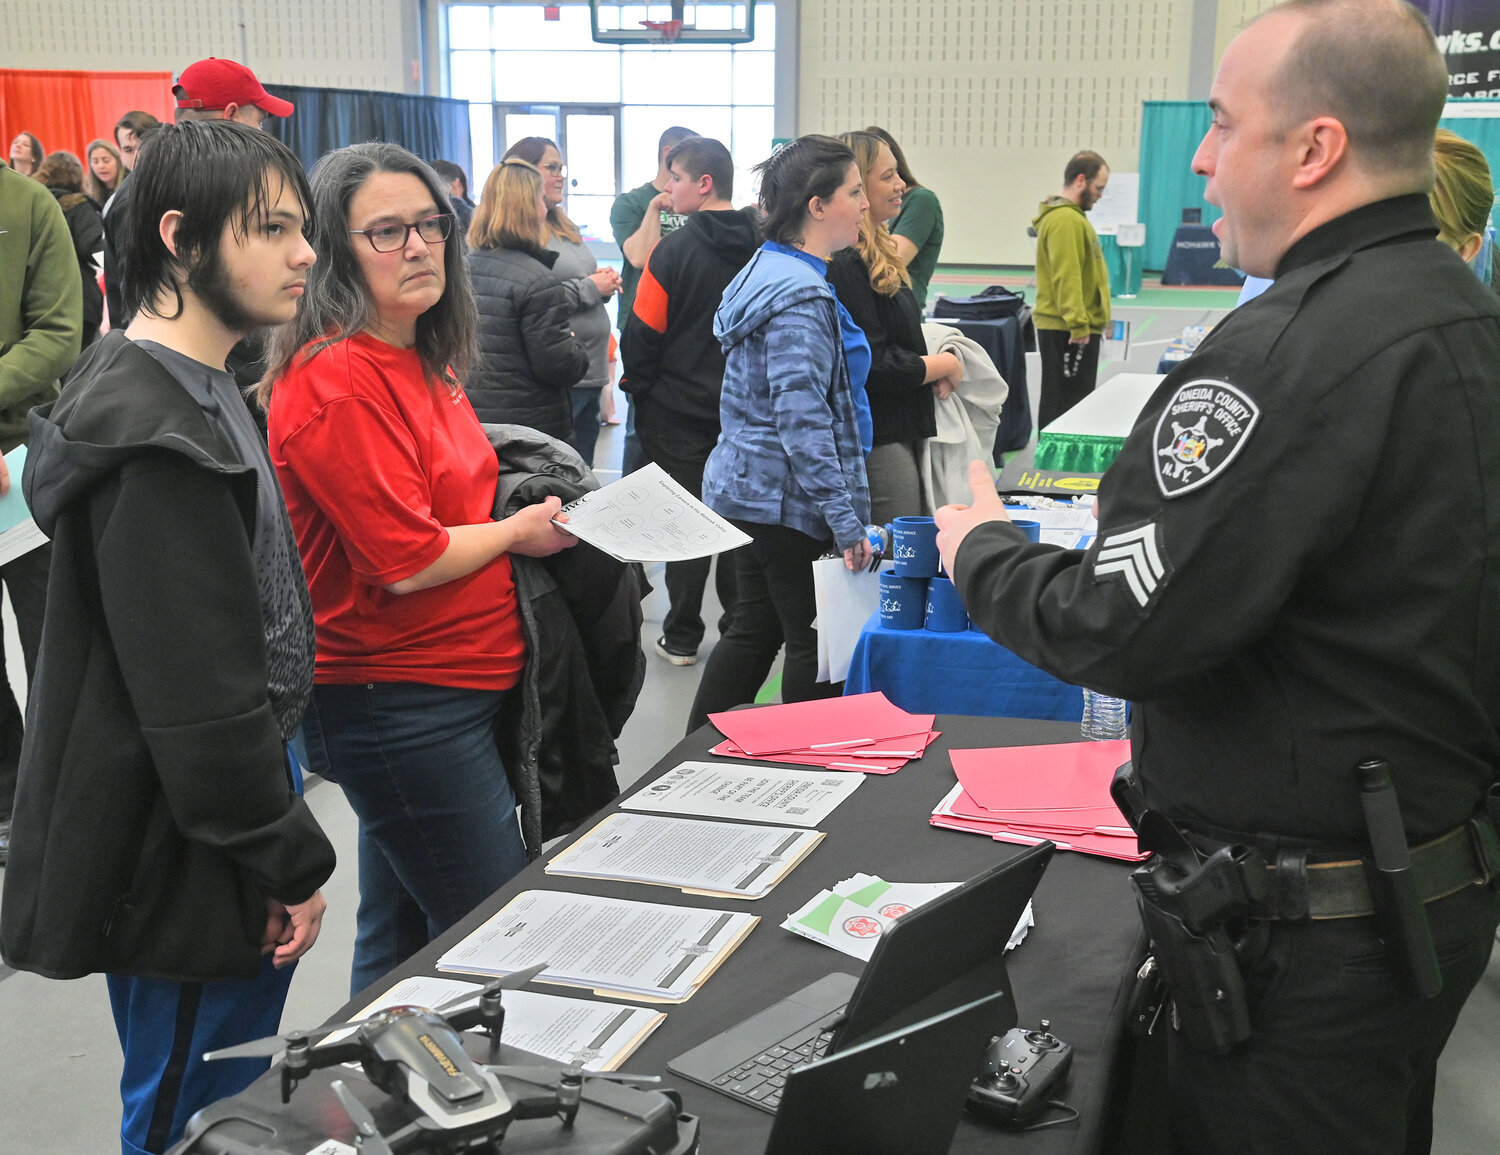 Oneida County Correction Division Sgt. Curtis Morgan, right, talks with Oneida High School student Connor Simms, left, and his mom, Michelle Simms, Tuesday, March 21, at the Exploring Careers in the Mohawk Valley event at Mohawk Valley Community College in Utica.